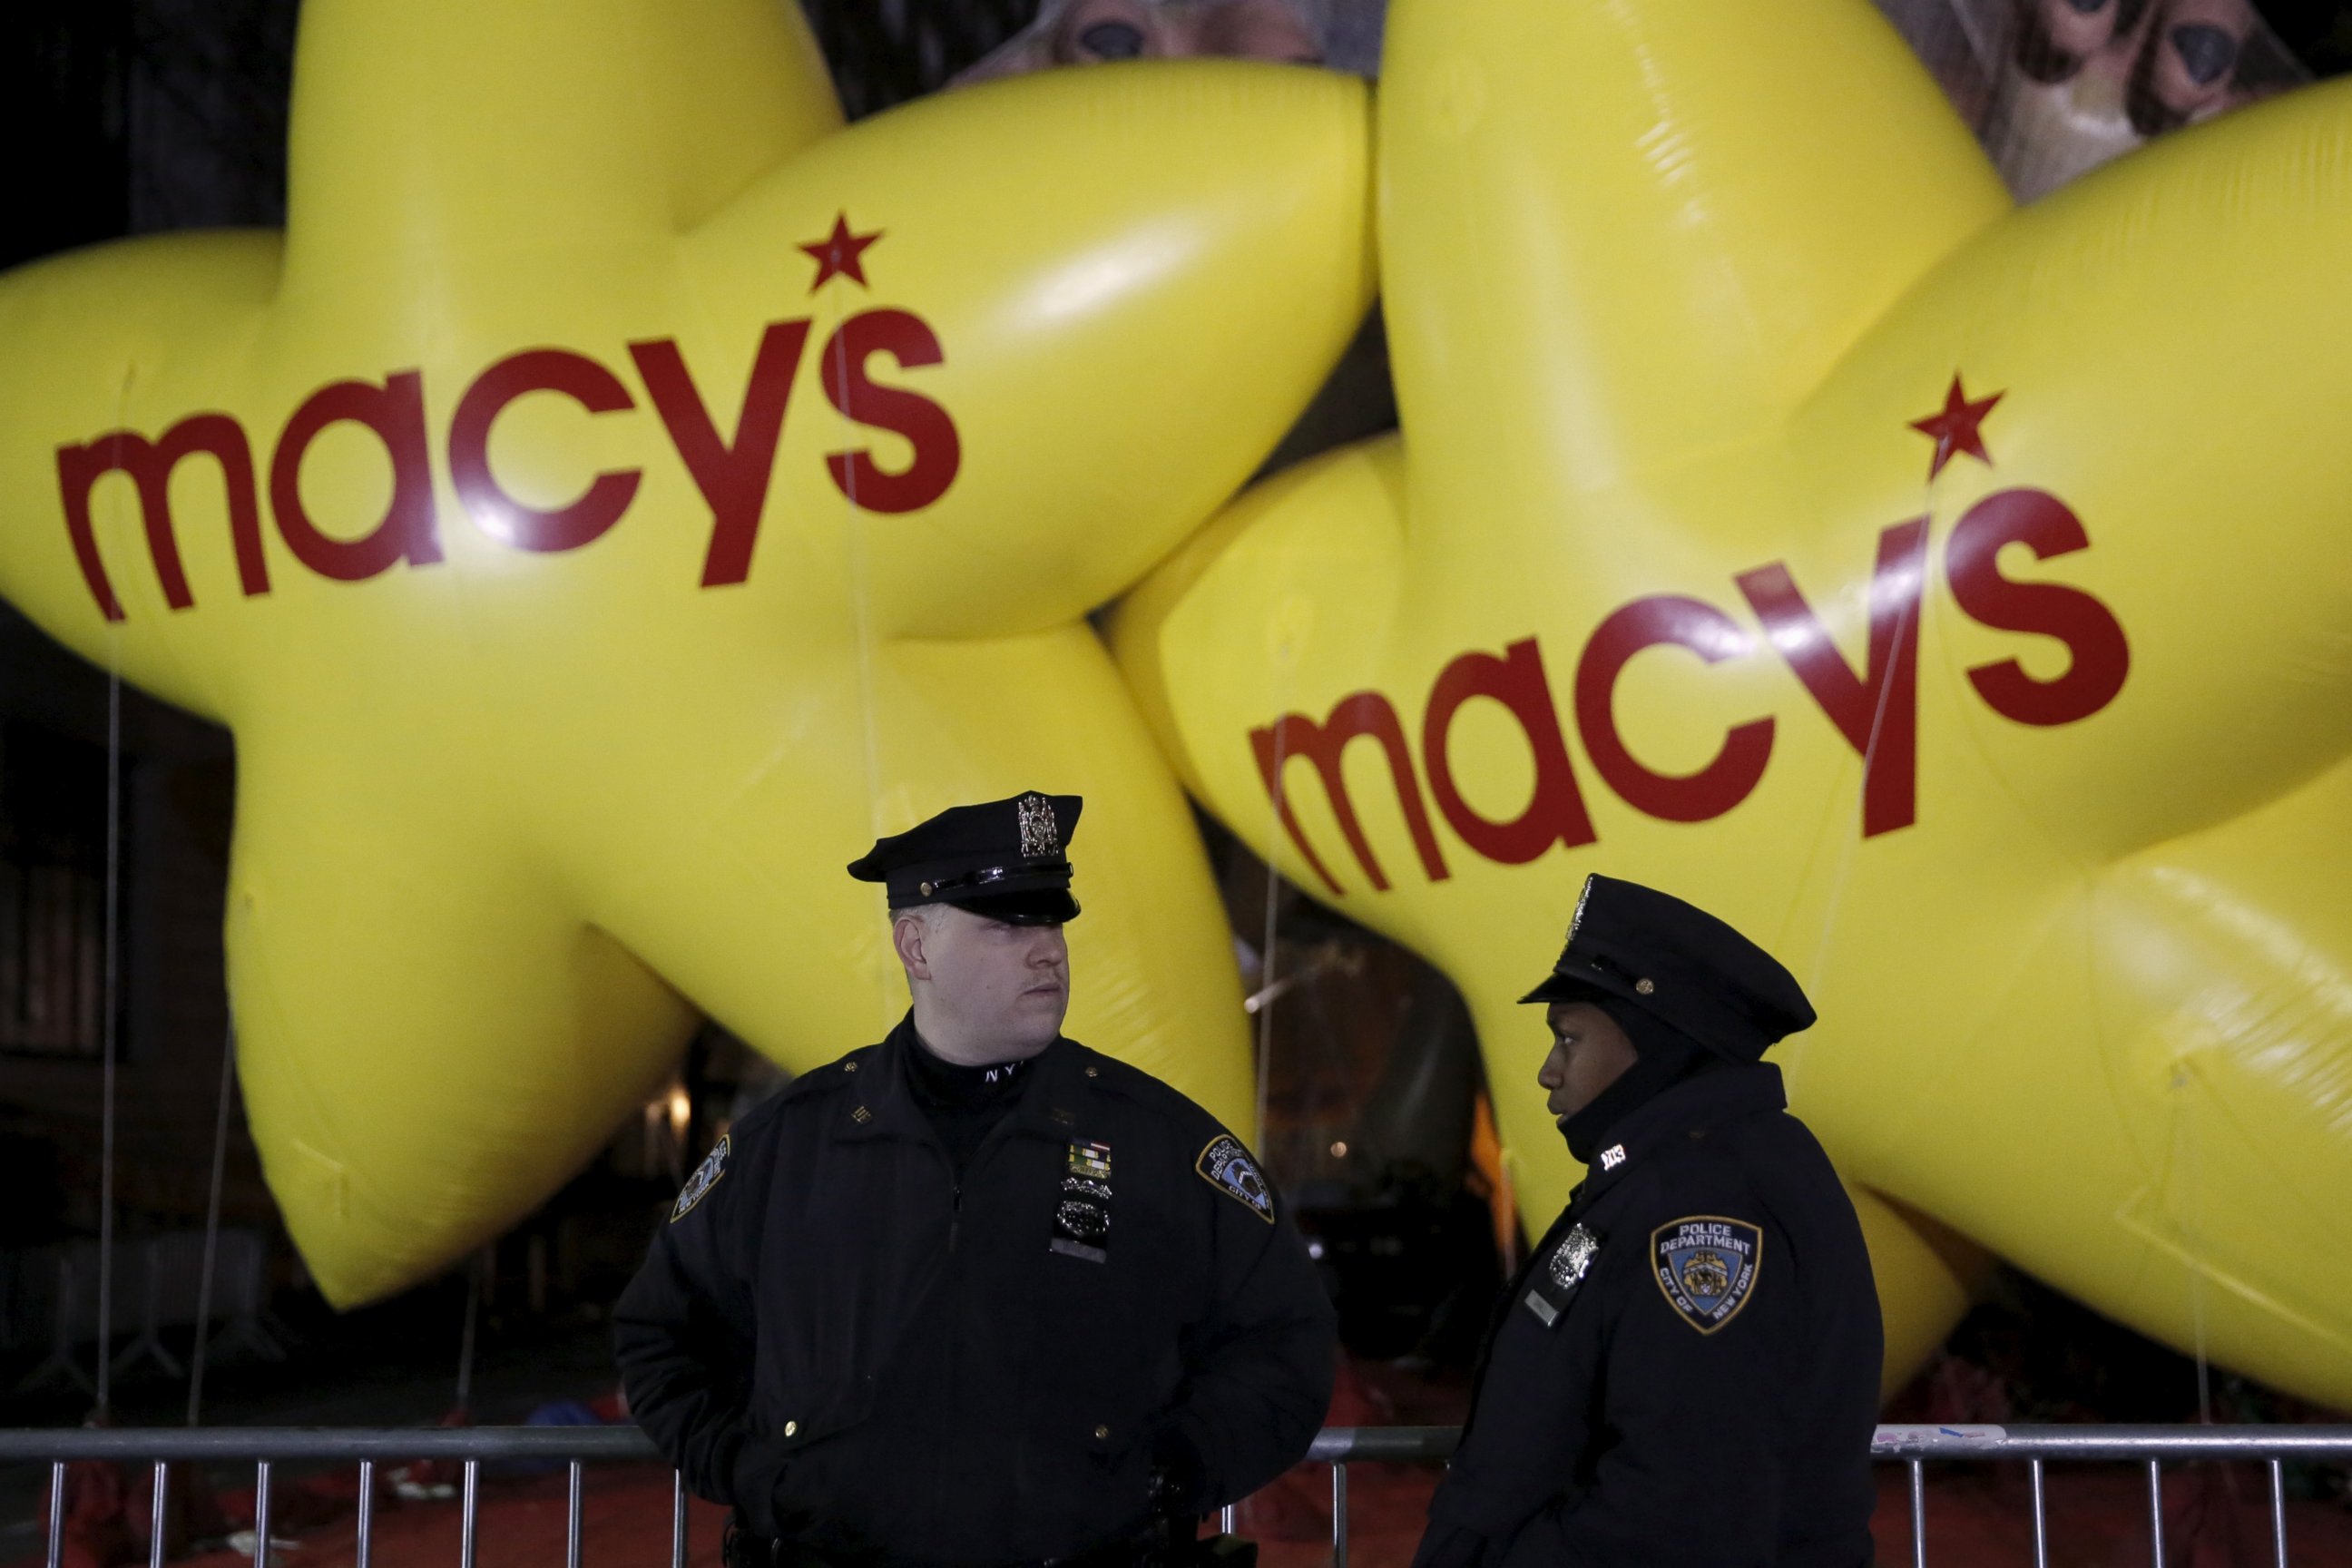 PHOTO: Members of the New York Police Department gather on the street before the 89th Macy's Thanksgiving Day Parade in the Manhattan borough of New York, Nov. 26, 2015.